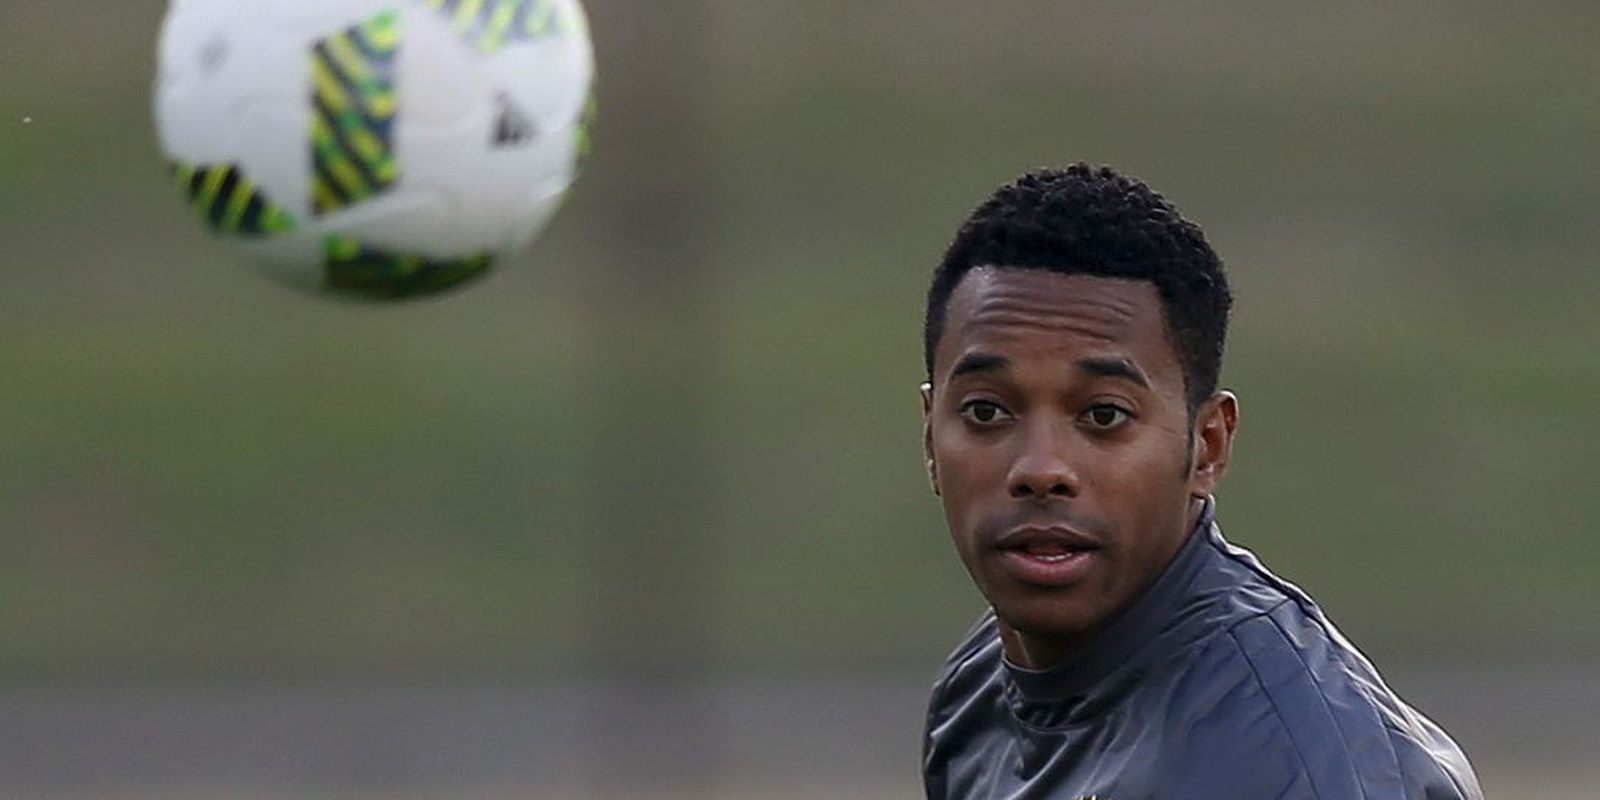 STJ gives 15 days for Robinho's defense to contest conviction in Italy